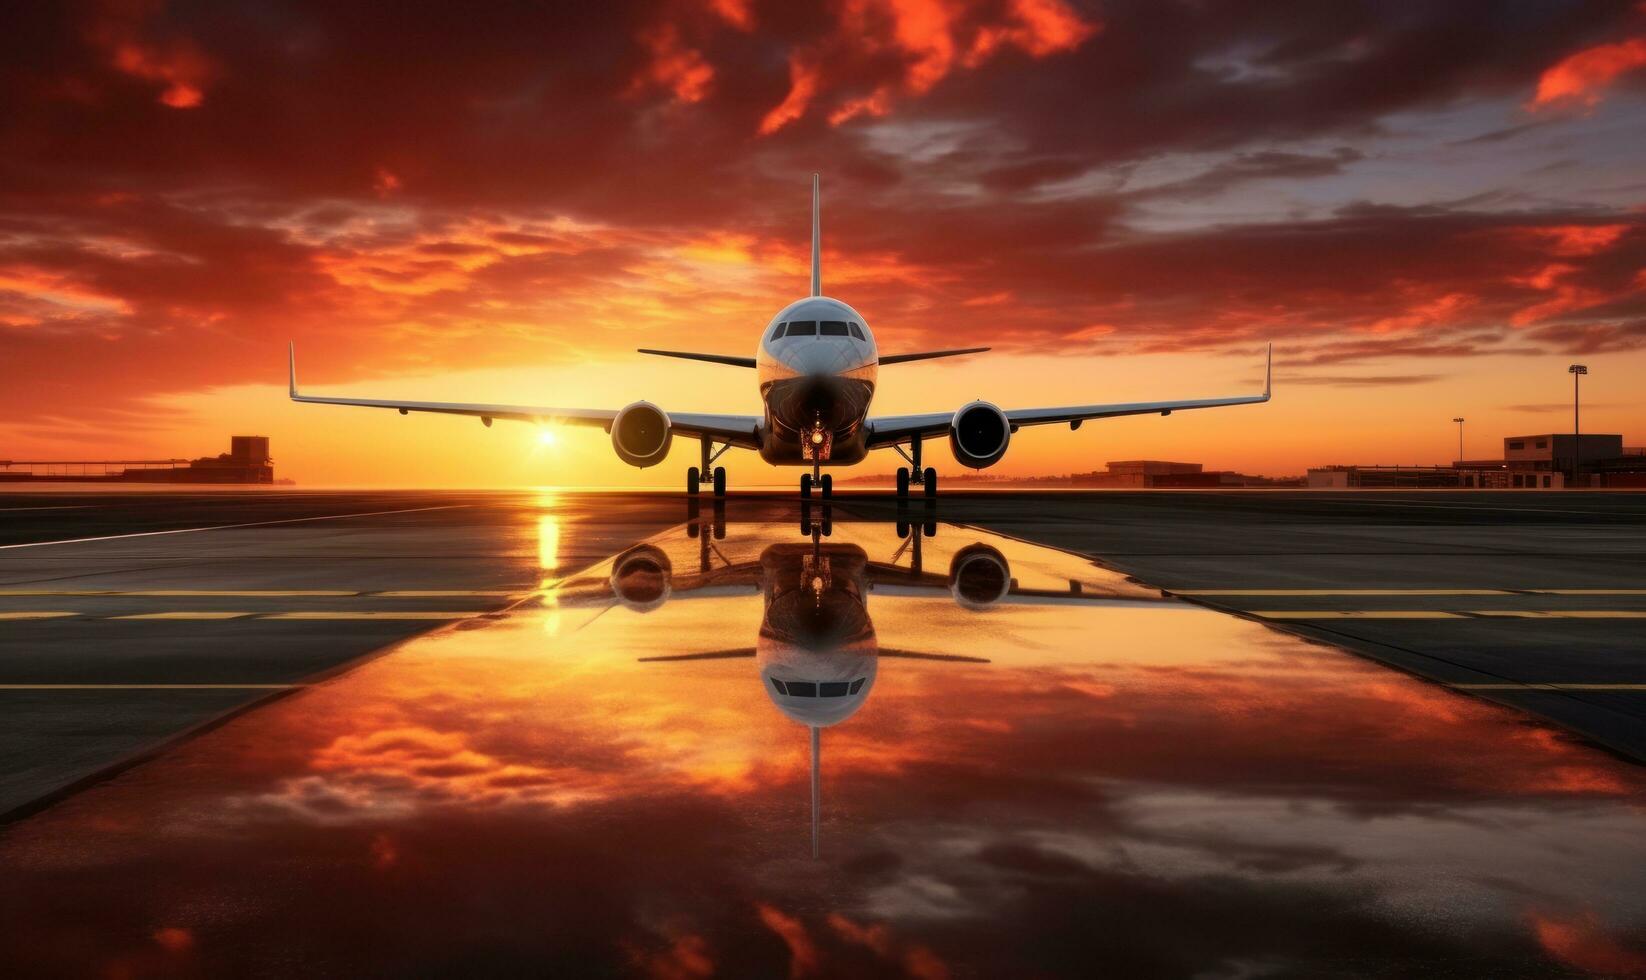 The sun is setting behind a plane on an airport photo